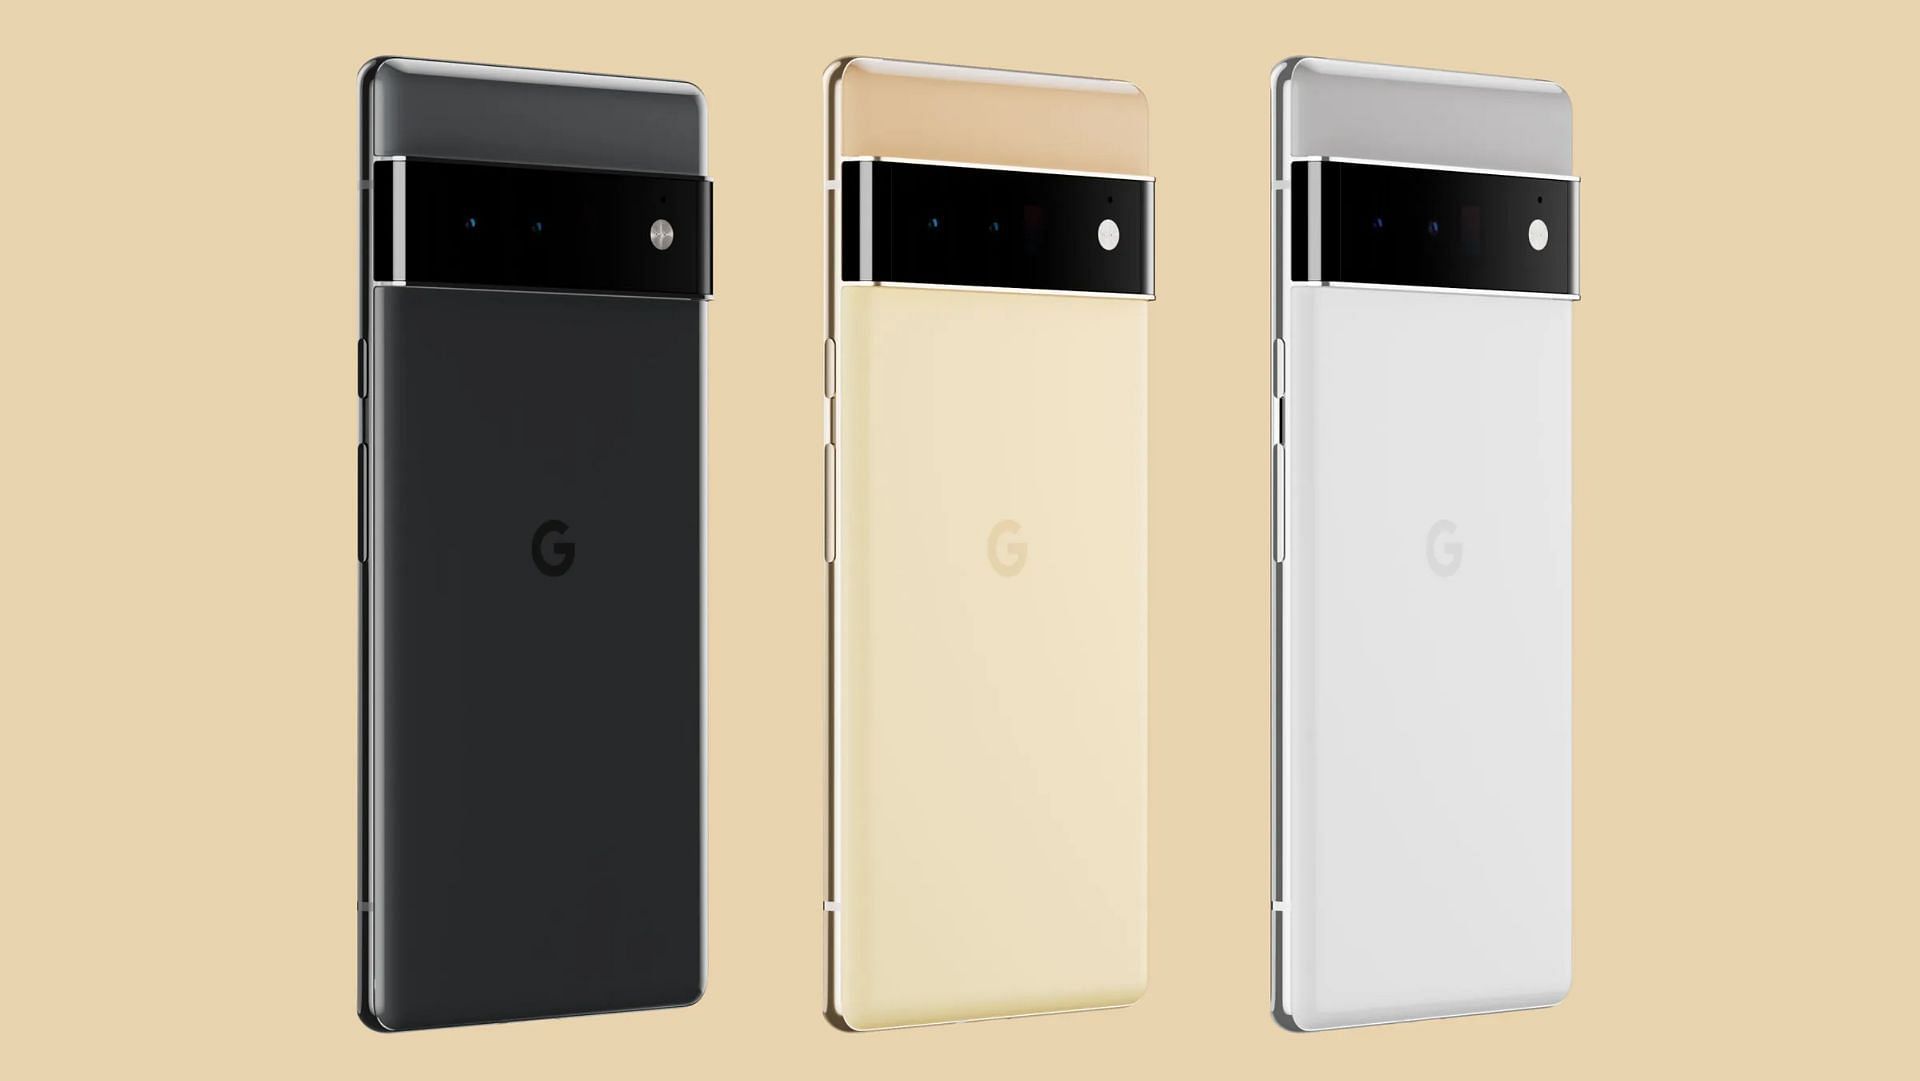 Pixel 6 series is worth considering this holiday sale (image by Google)